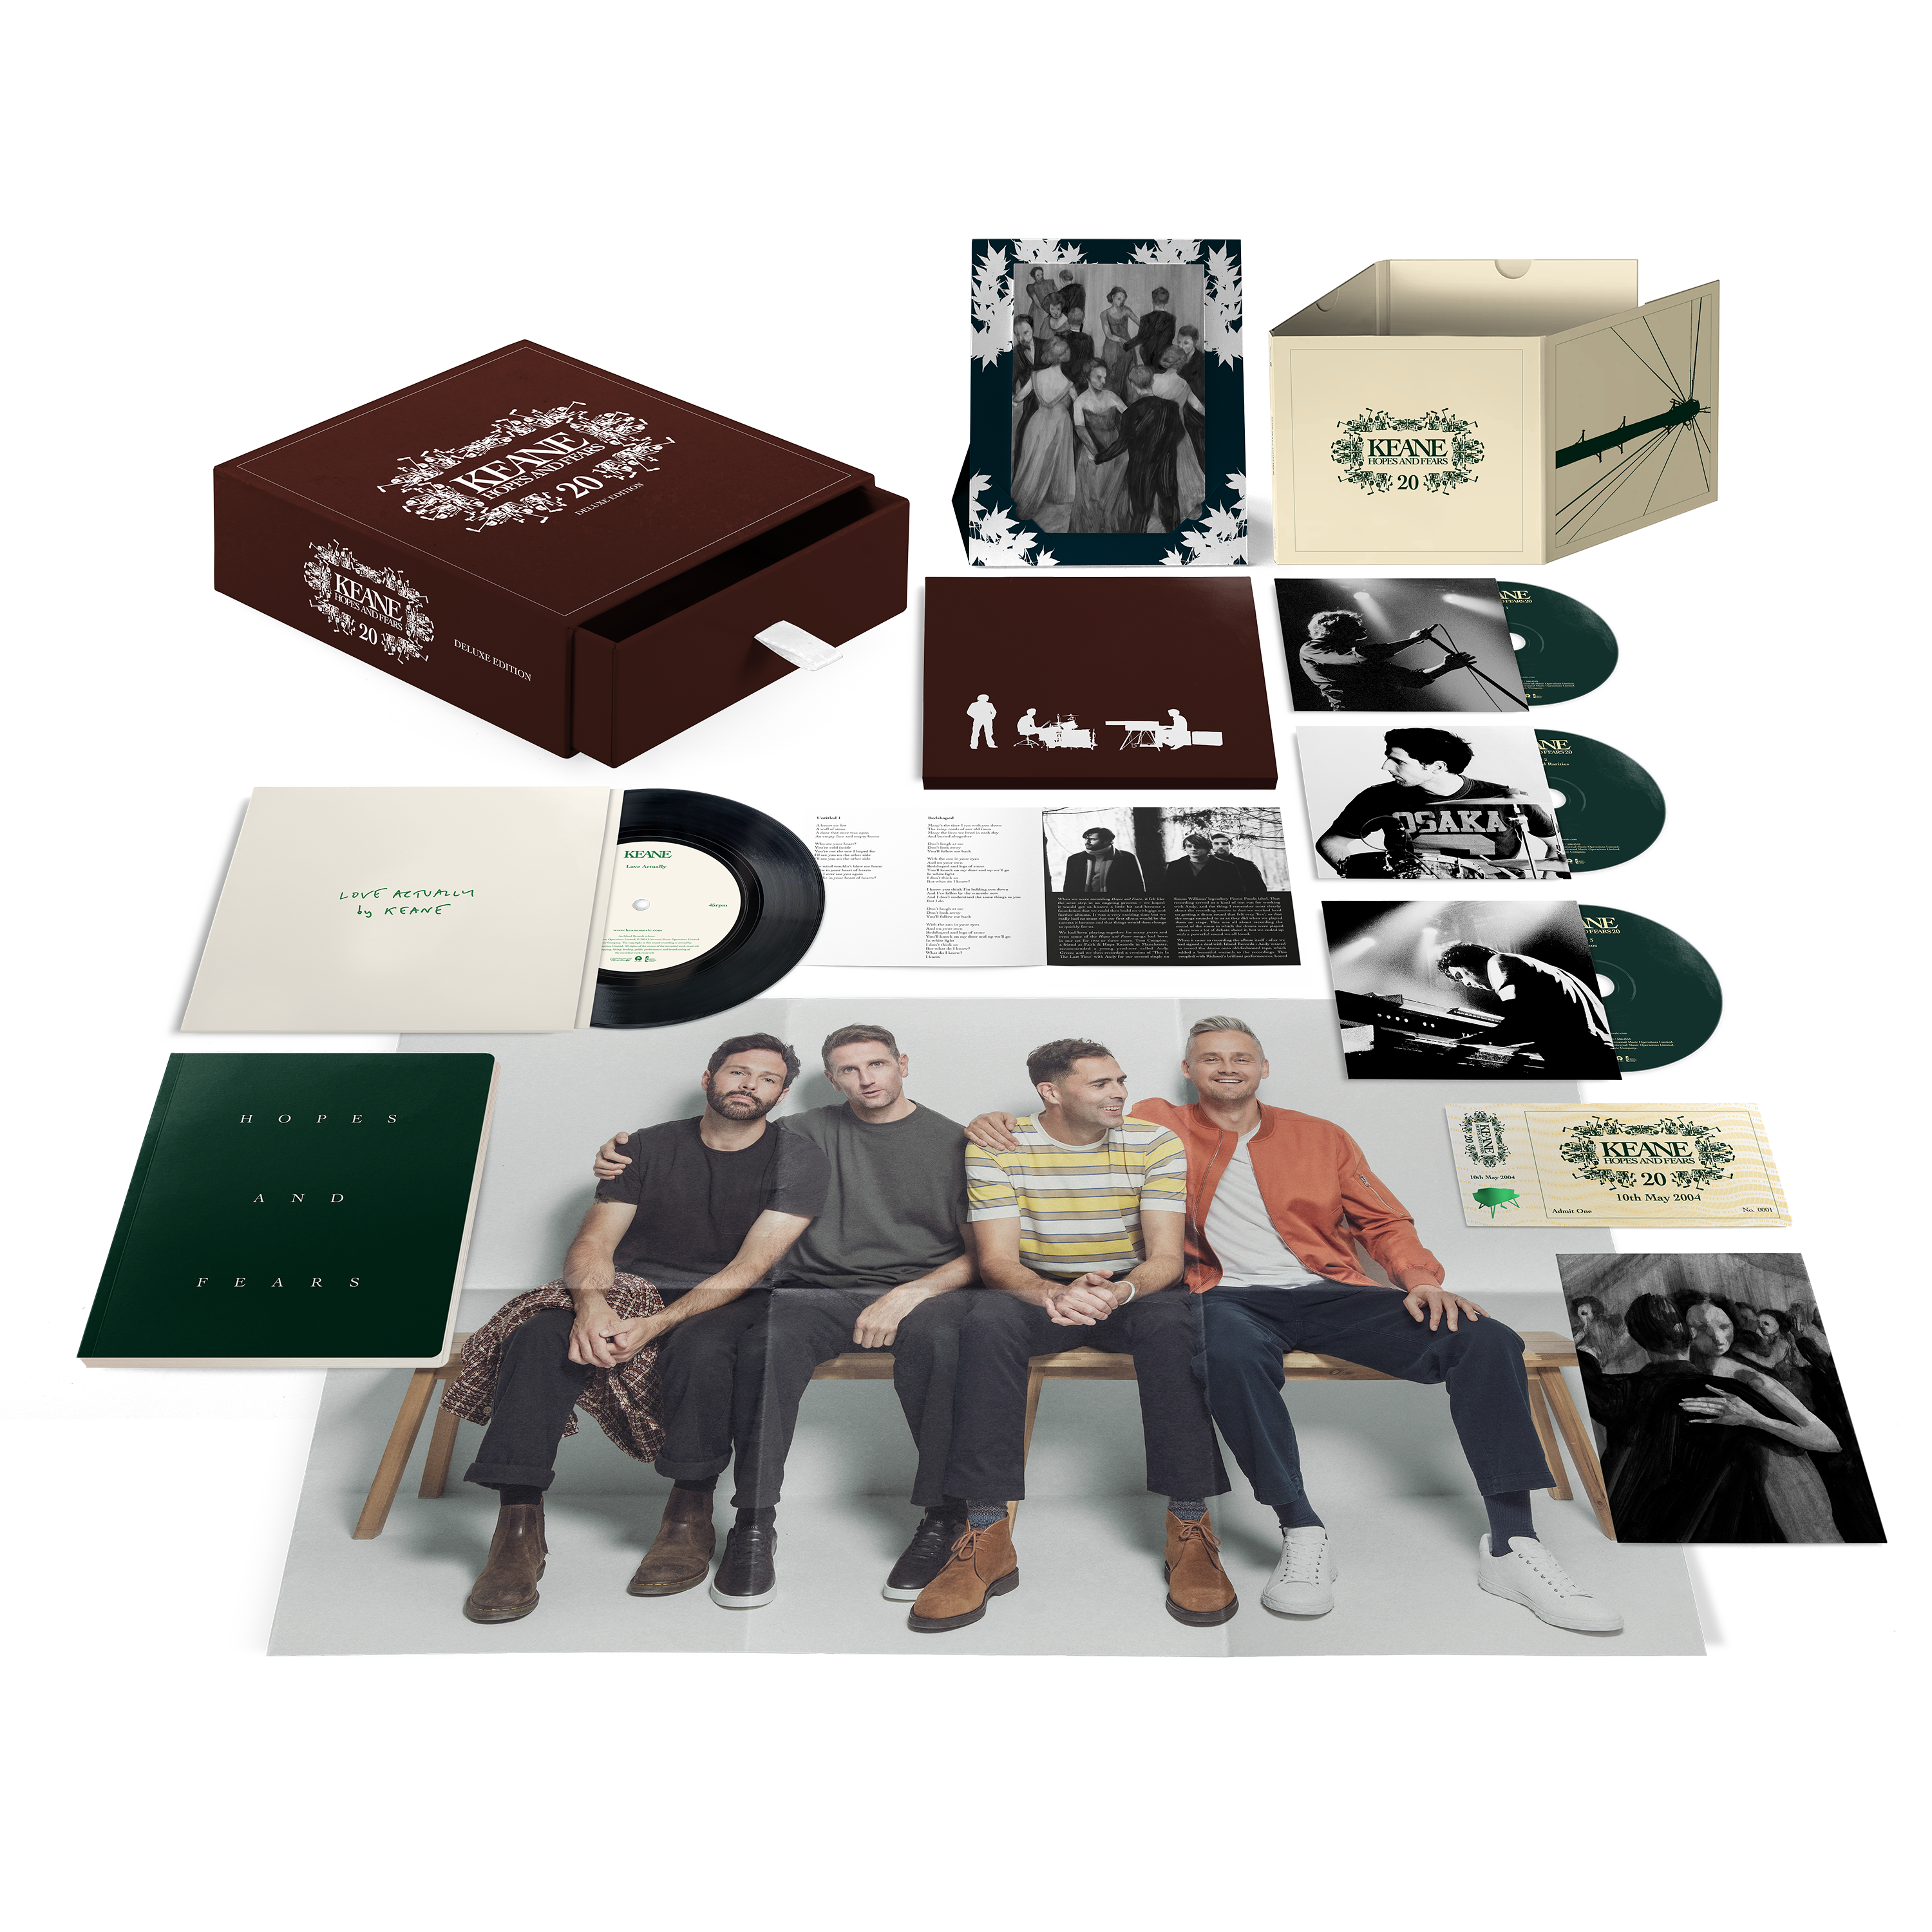 Hopes and Fears (20th Anniversary): Limited 'Galaxy Effect' Vinyl LP, Deluxe 3CD Box Set + Somewhere Only We Know Doormat